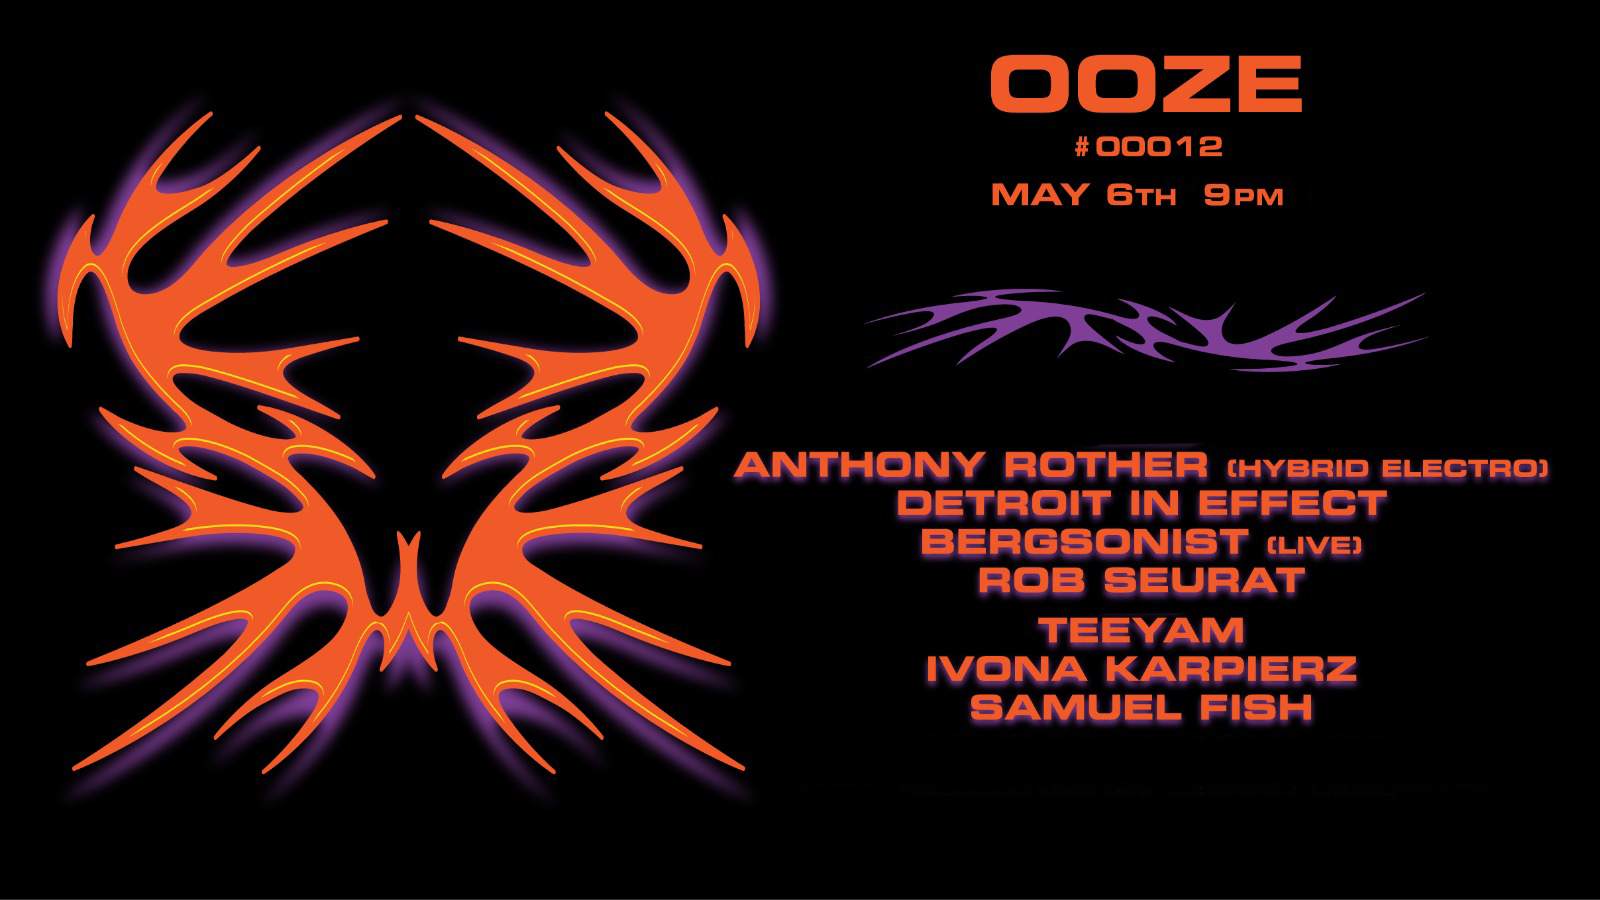 Ooze with Anthony Rother (Hybrid Electro), Detroit In Effect, Bergsonist (Live) & More - Página frontal